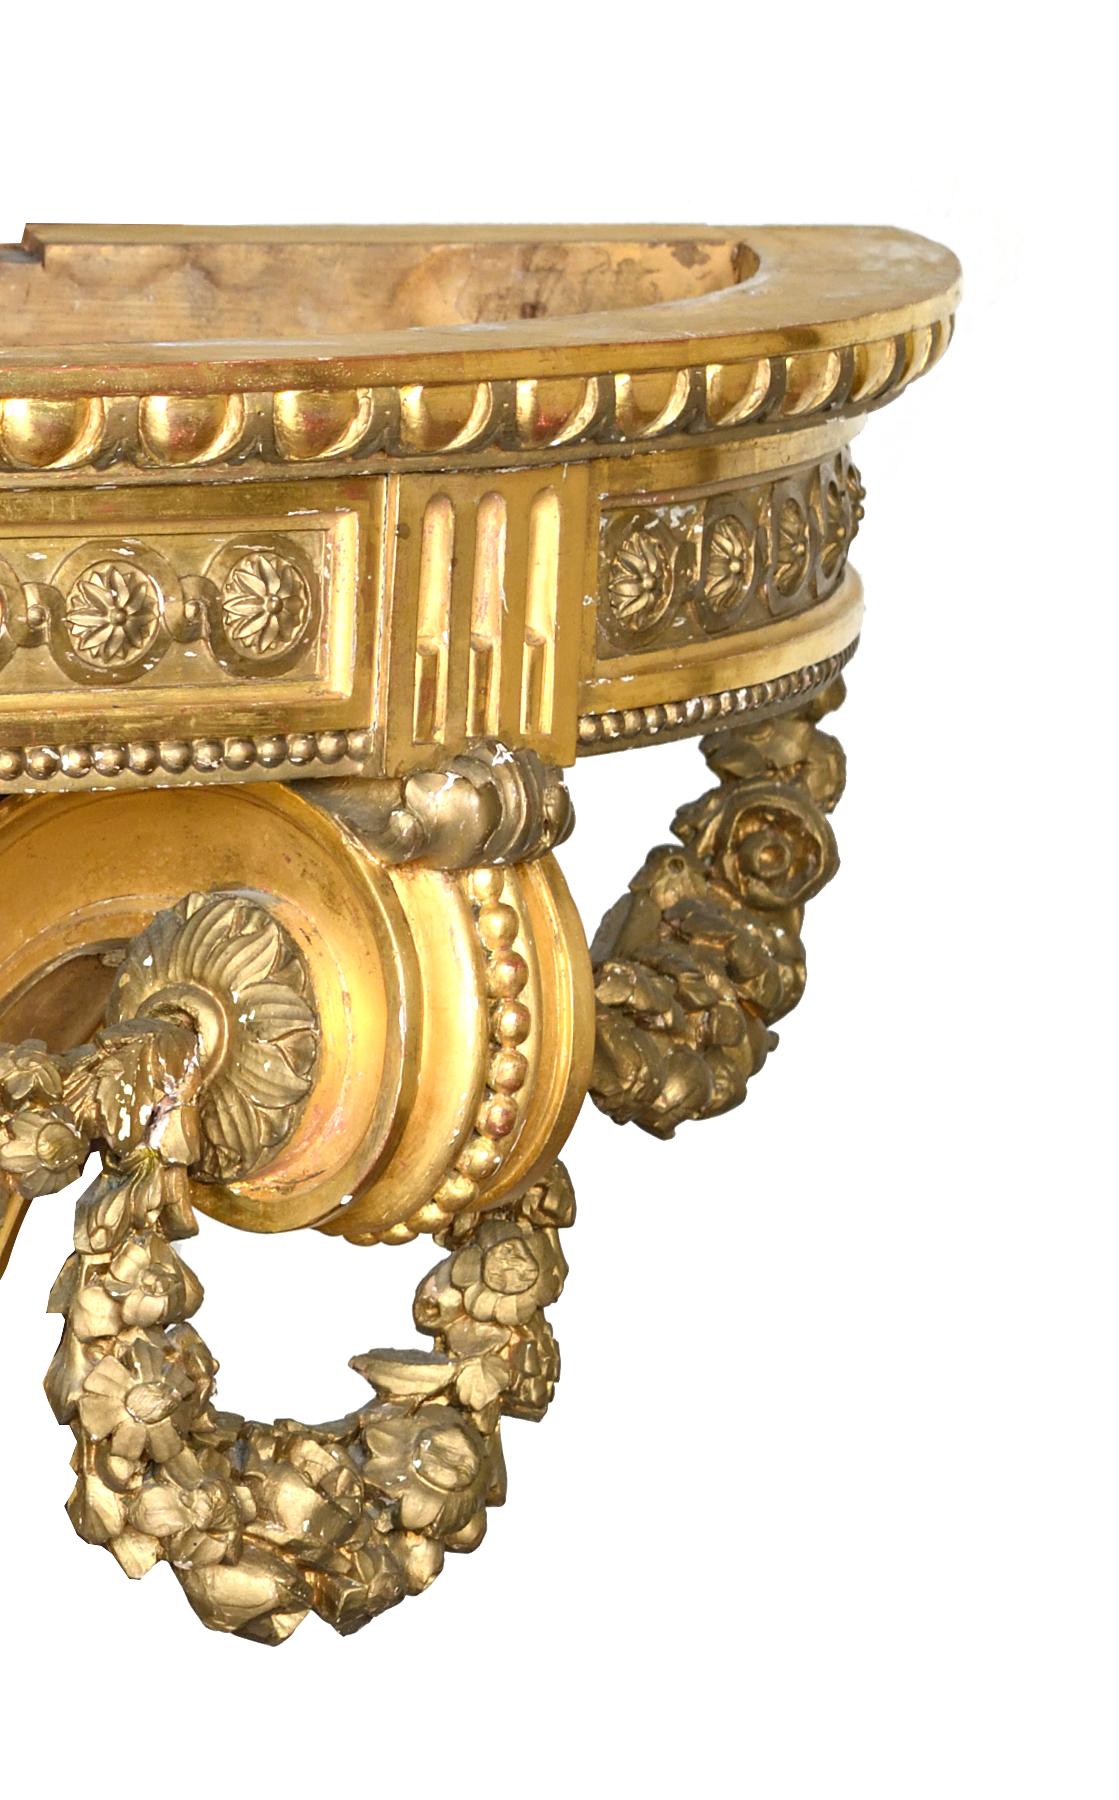 A beautiful and extremely decorative french louis XVI style giltwood console with marble top The carving of this console is very exquisite.